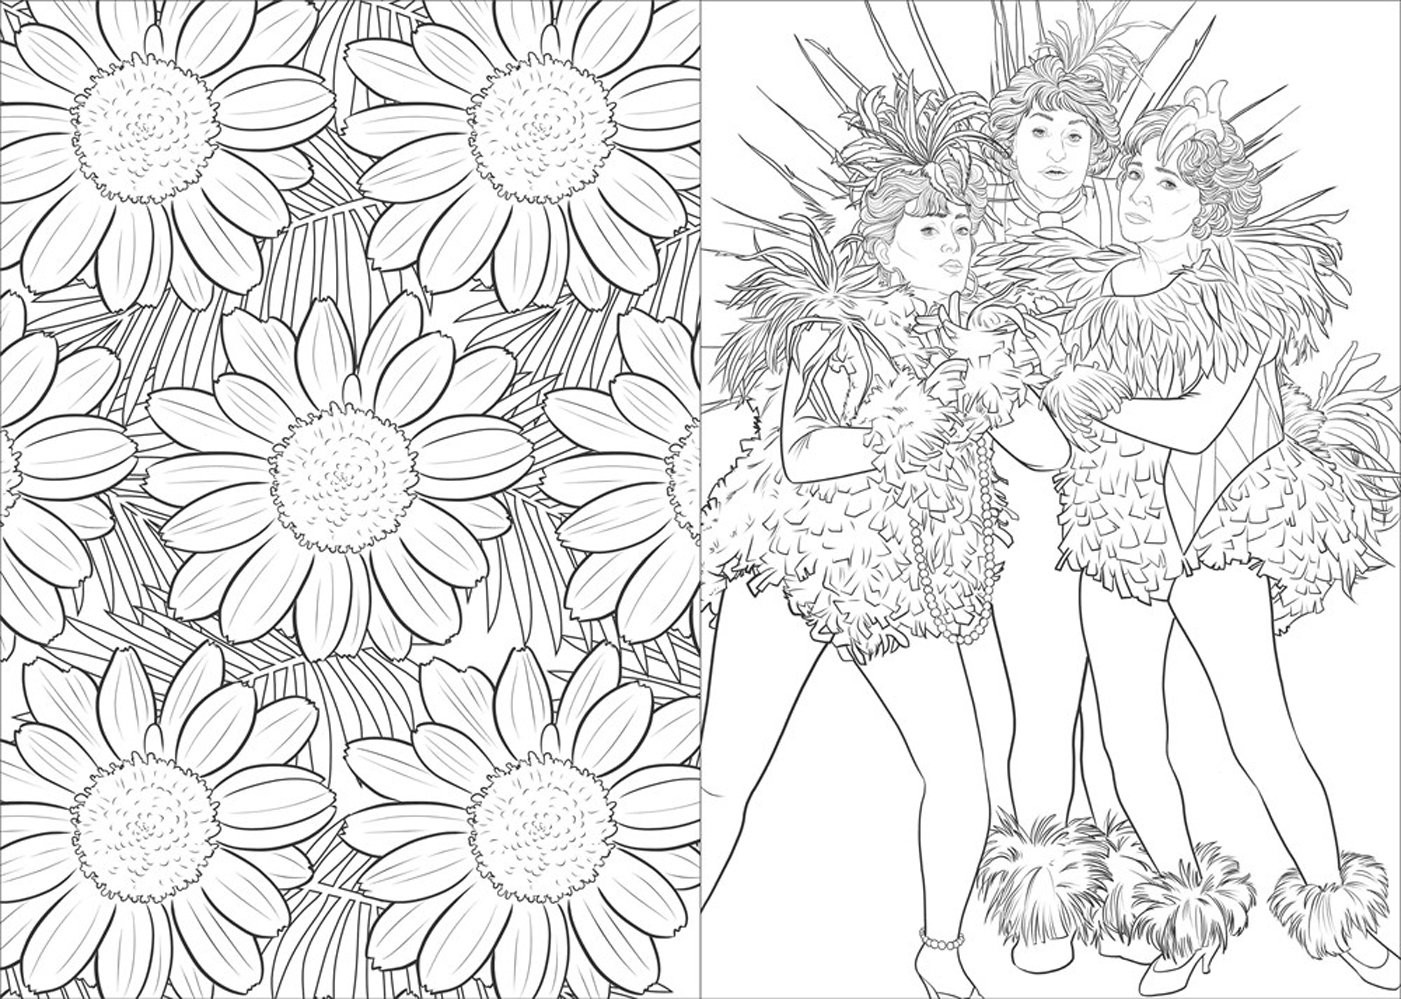 Golden Girls Coloring Book
 The Golden Girls Now in Coloring Book Form